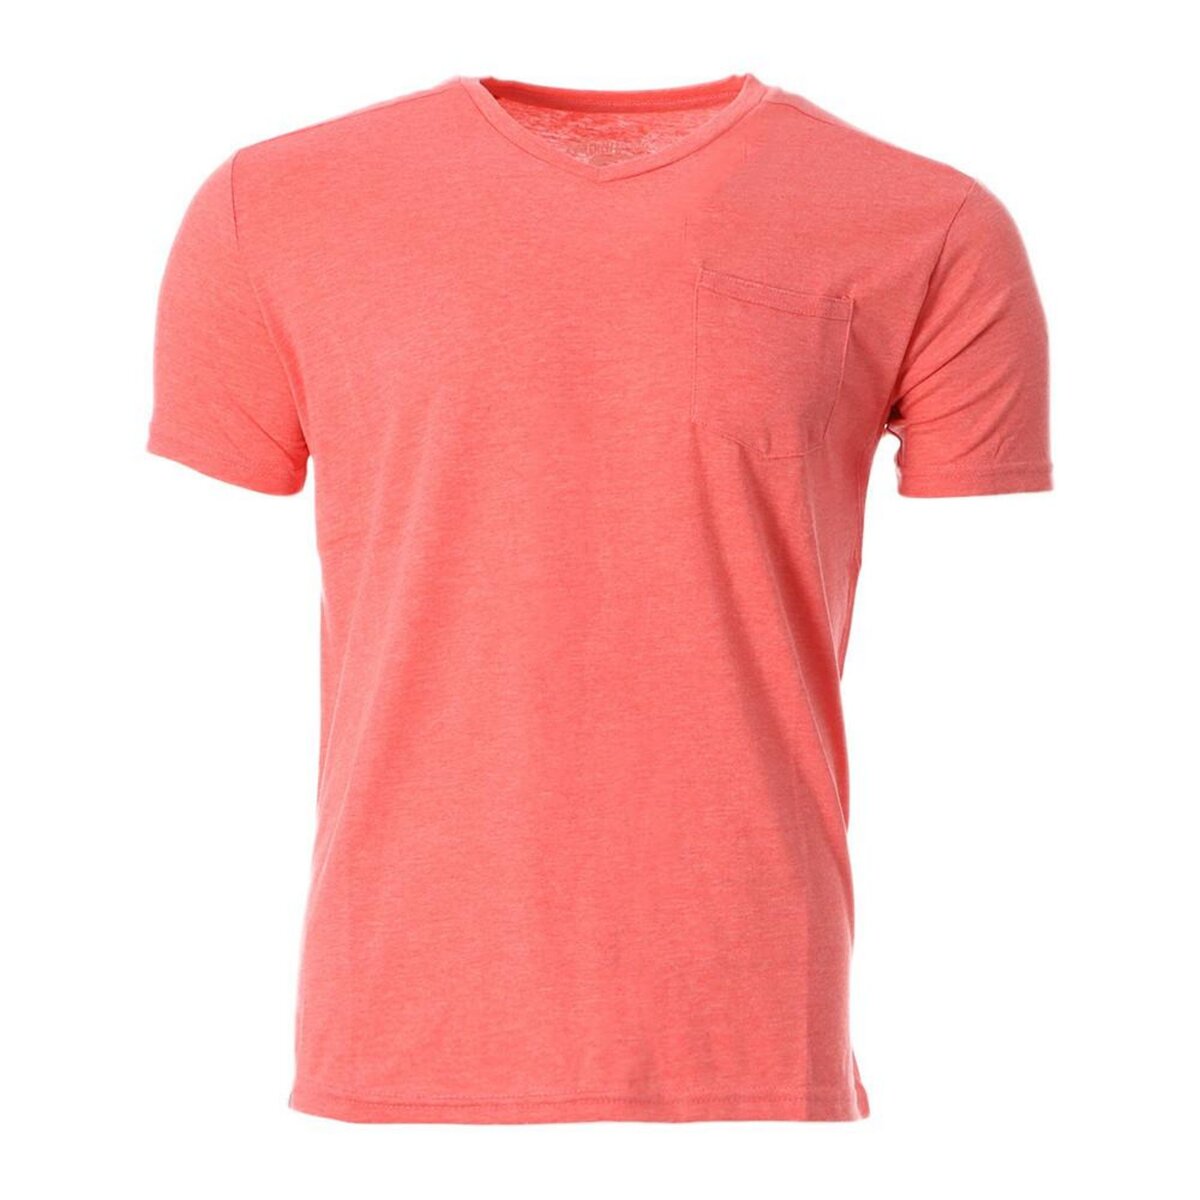 RMS 26 T-shirt Rose Homme RMS26 91070